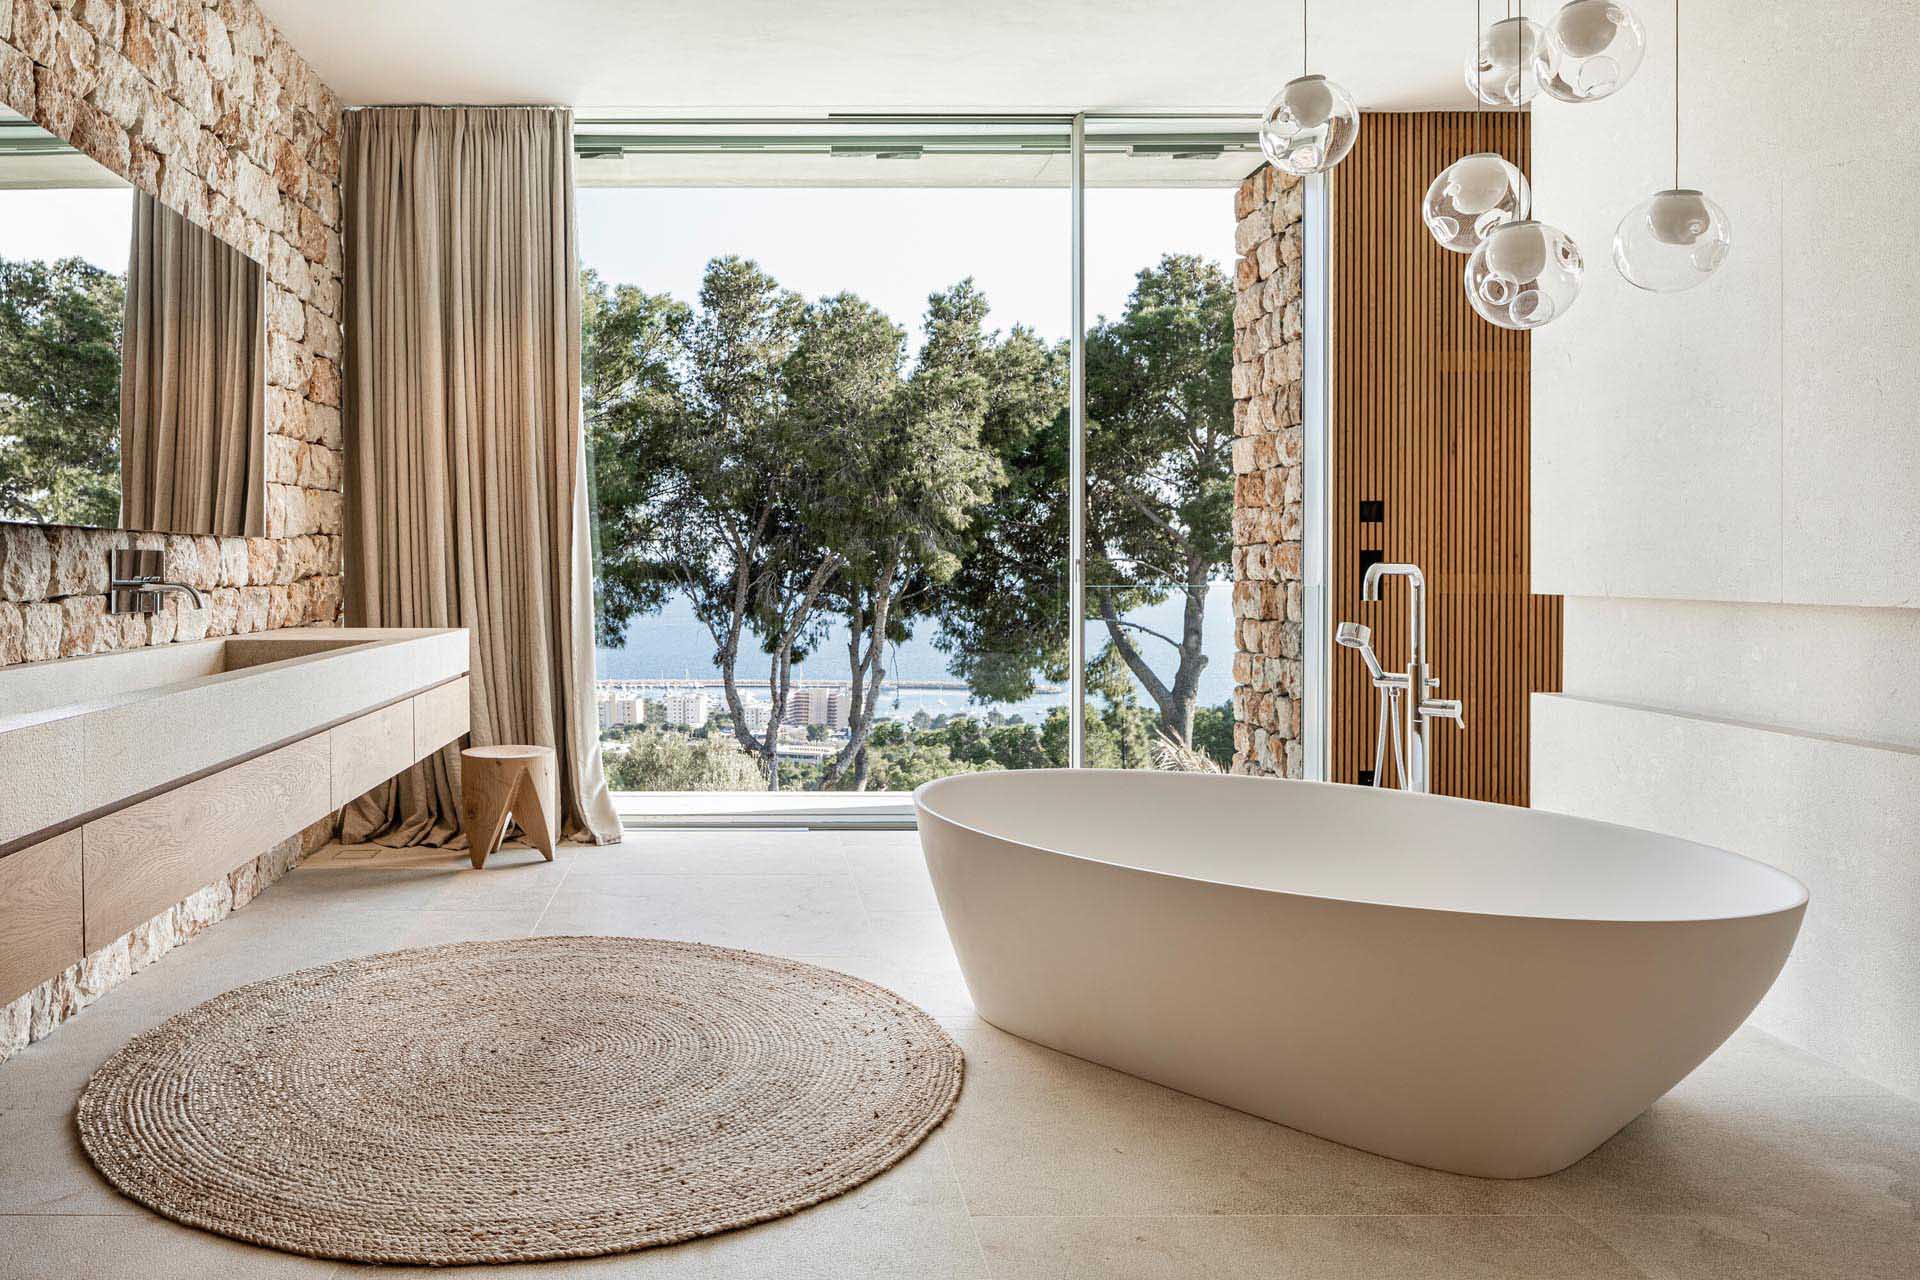 In this modern bathroom, the stone wall becomes a backdrop for the floating vanity, while a freestanding bathtub is perfectly positioned for water views.